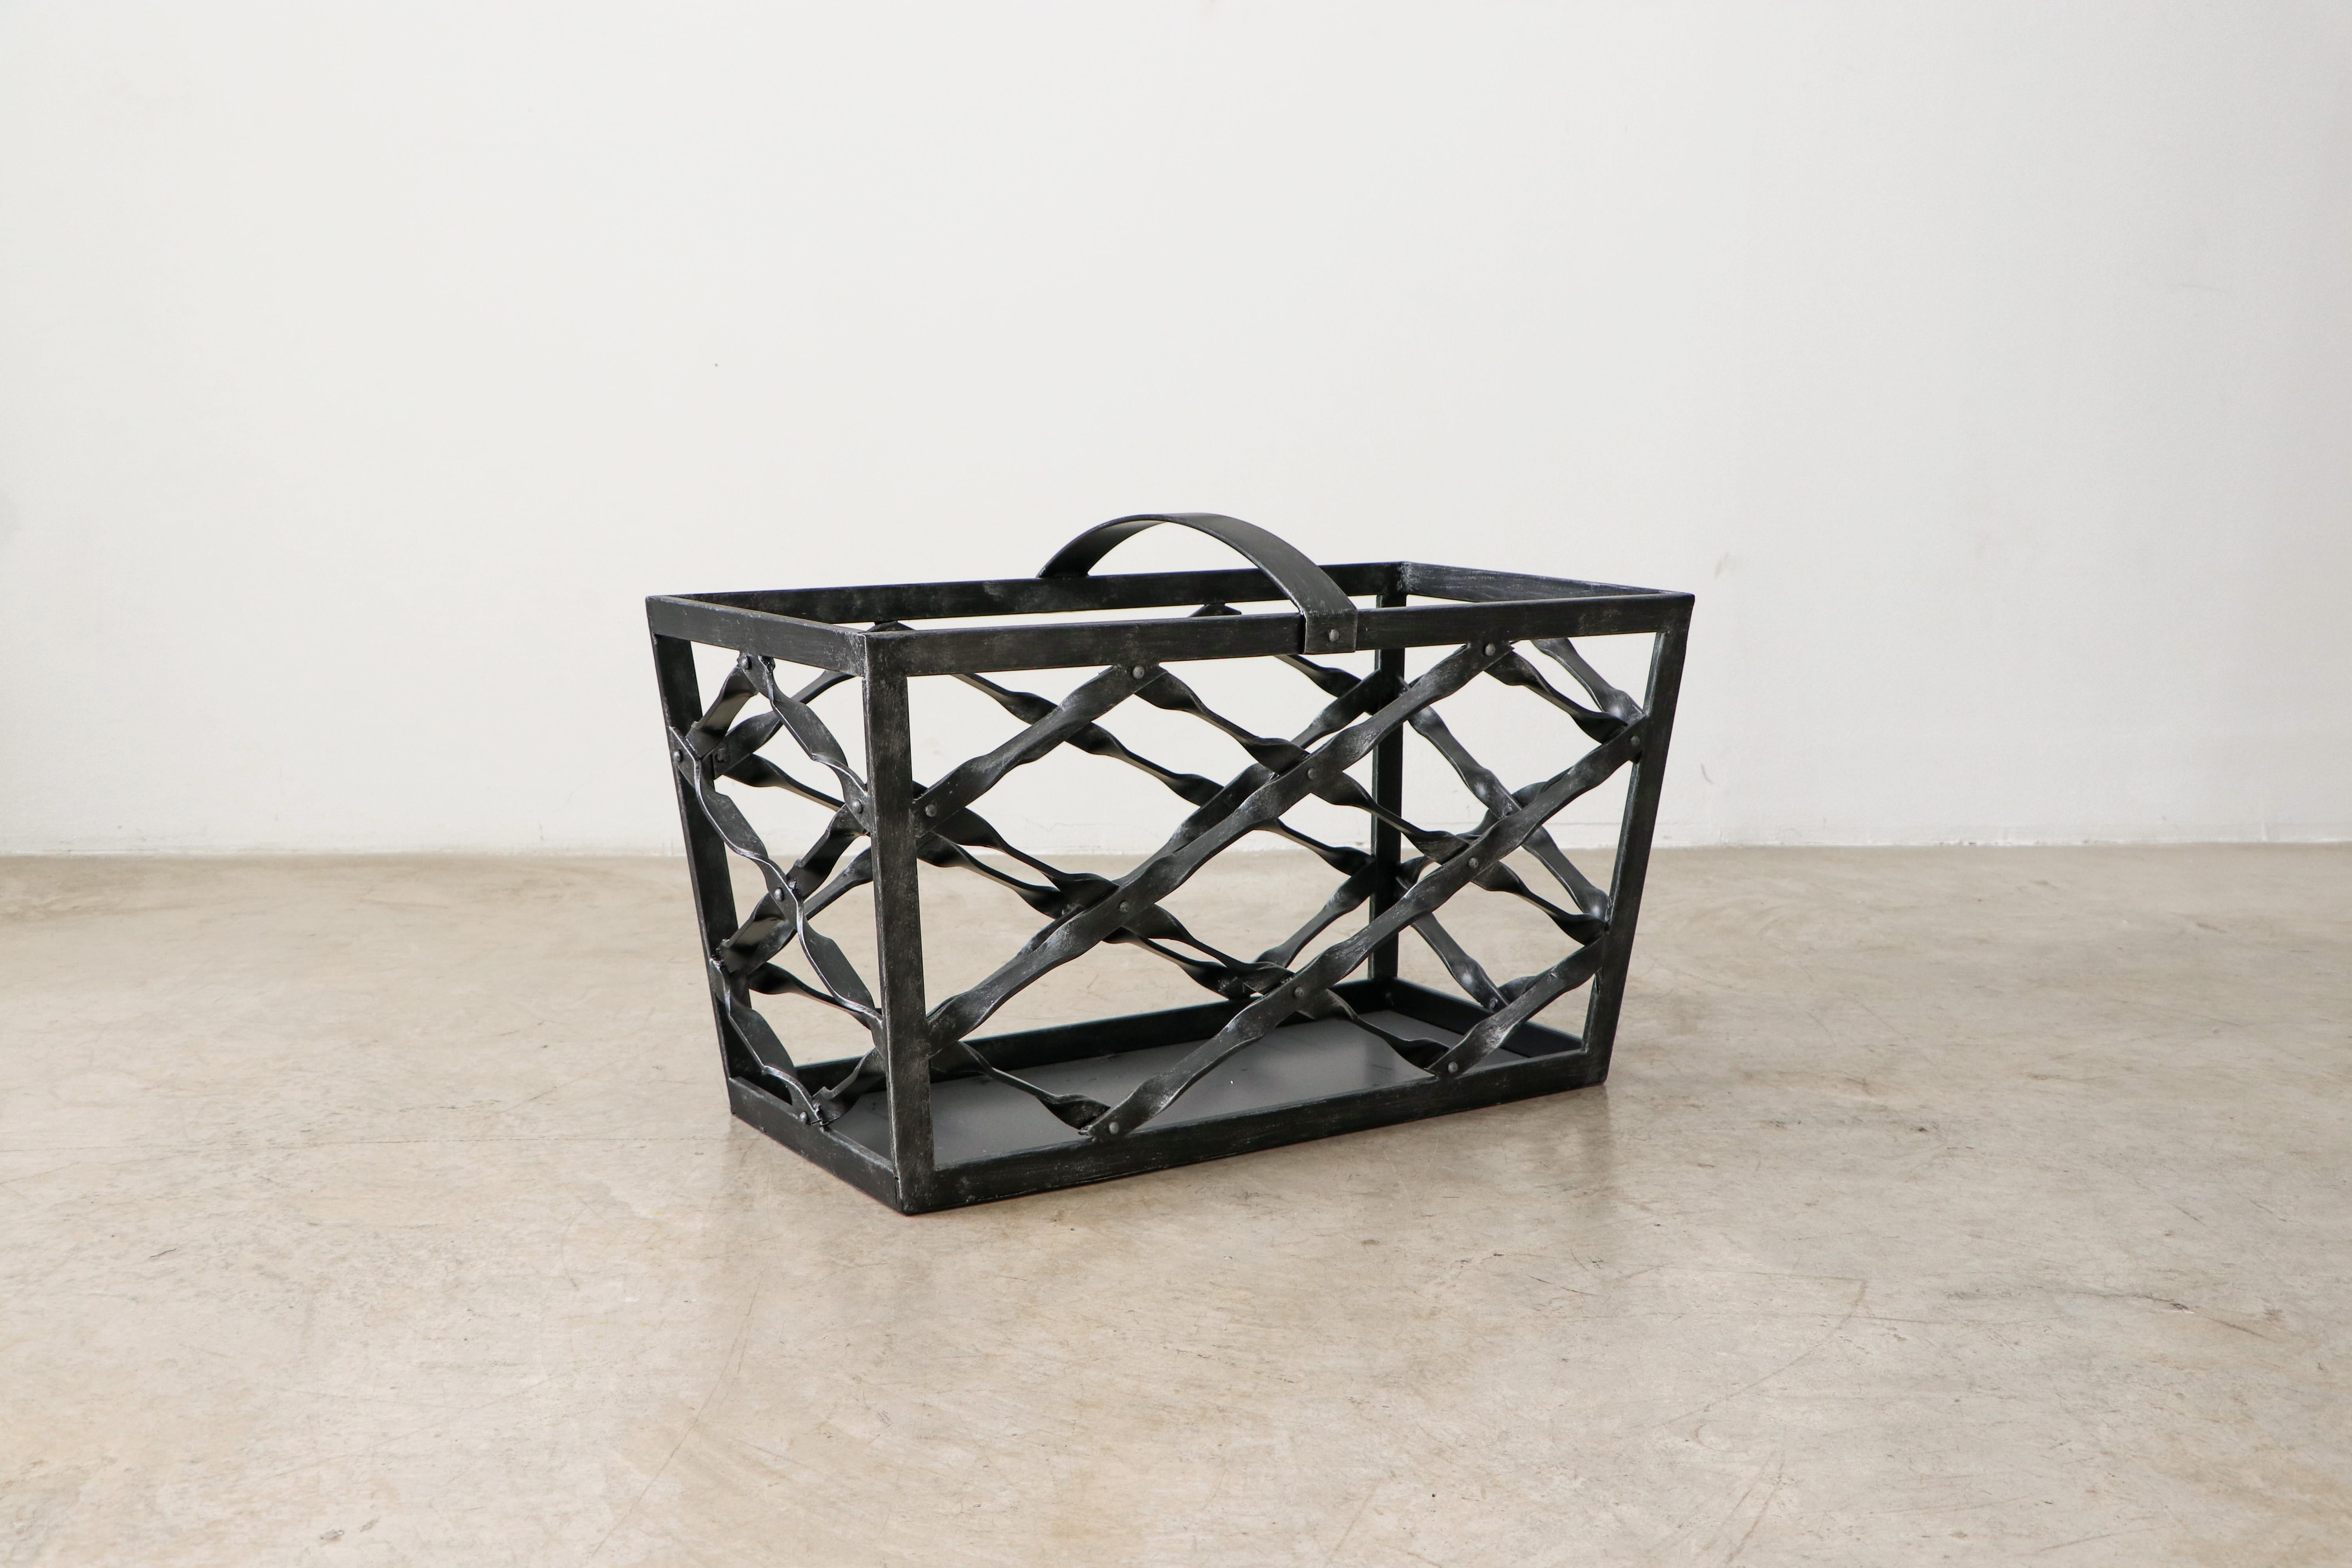 The Fierro collection shows the magnificence of wrought iron. Through this sculptural basket, the artist wants to express the sensual attractiveness of the strength of this eternal material.

The Fierro basket is a functional brutal style storage